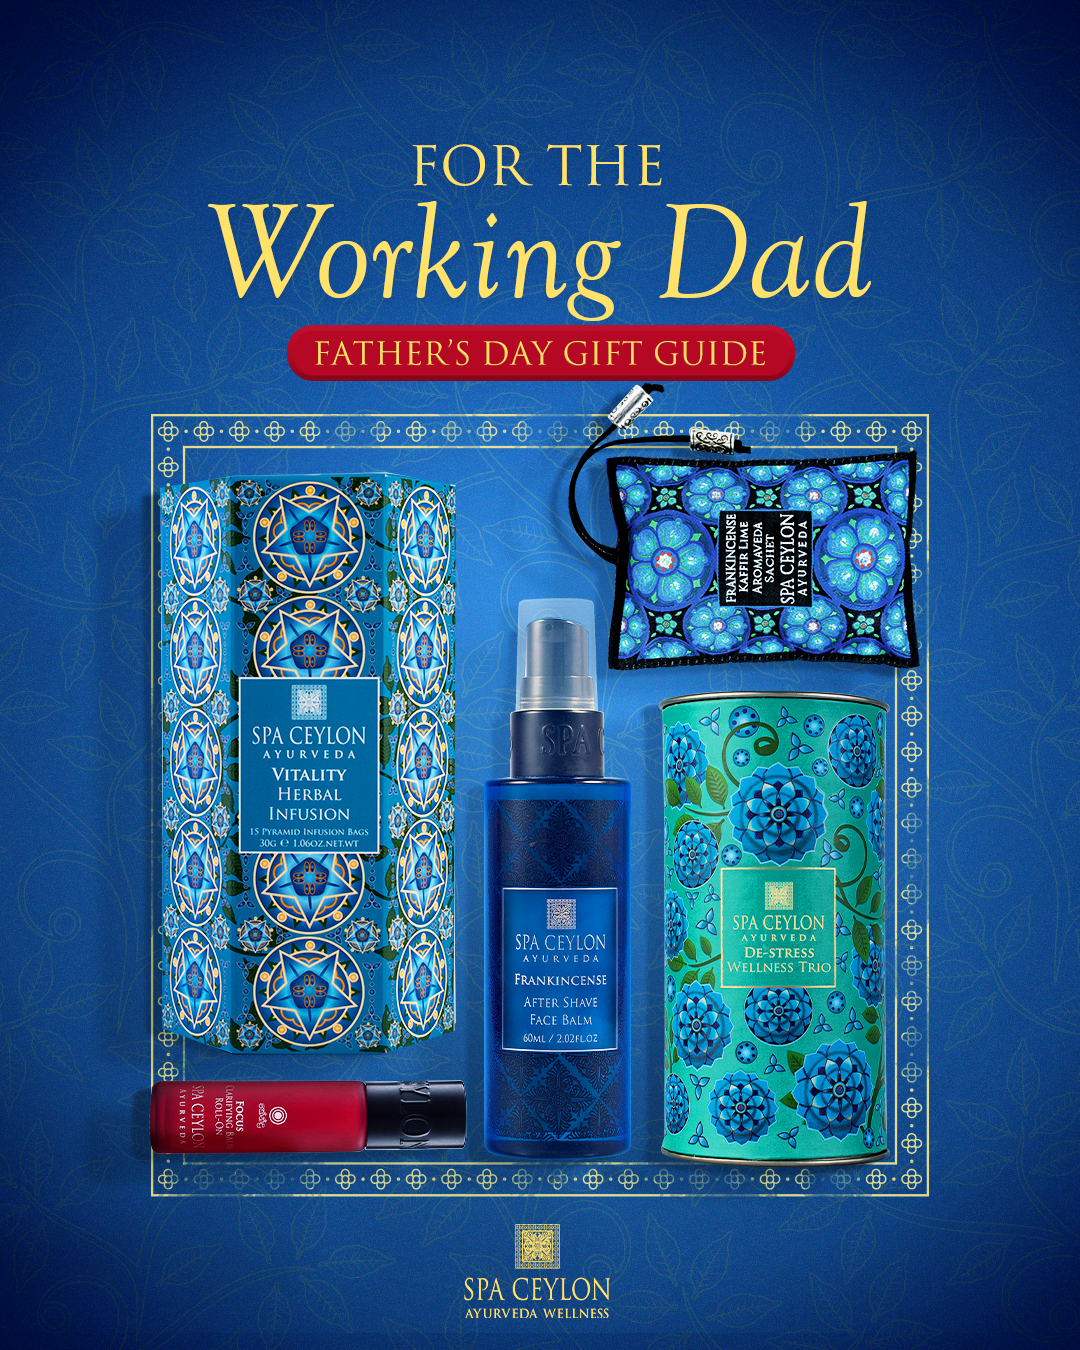 Do-it-for-Dad---Gift-Guide---Working-Dad_1.png__PID:1d6e86a3-c69b-4013-bbb3-7c5925202c4f